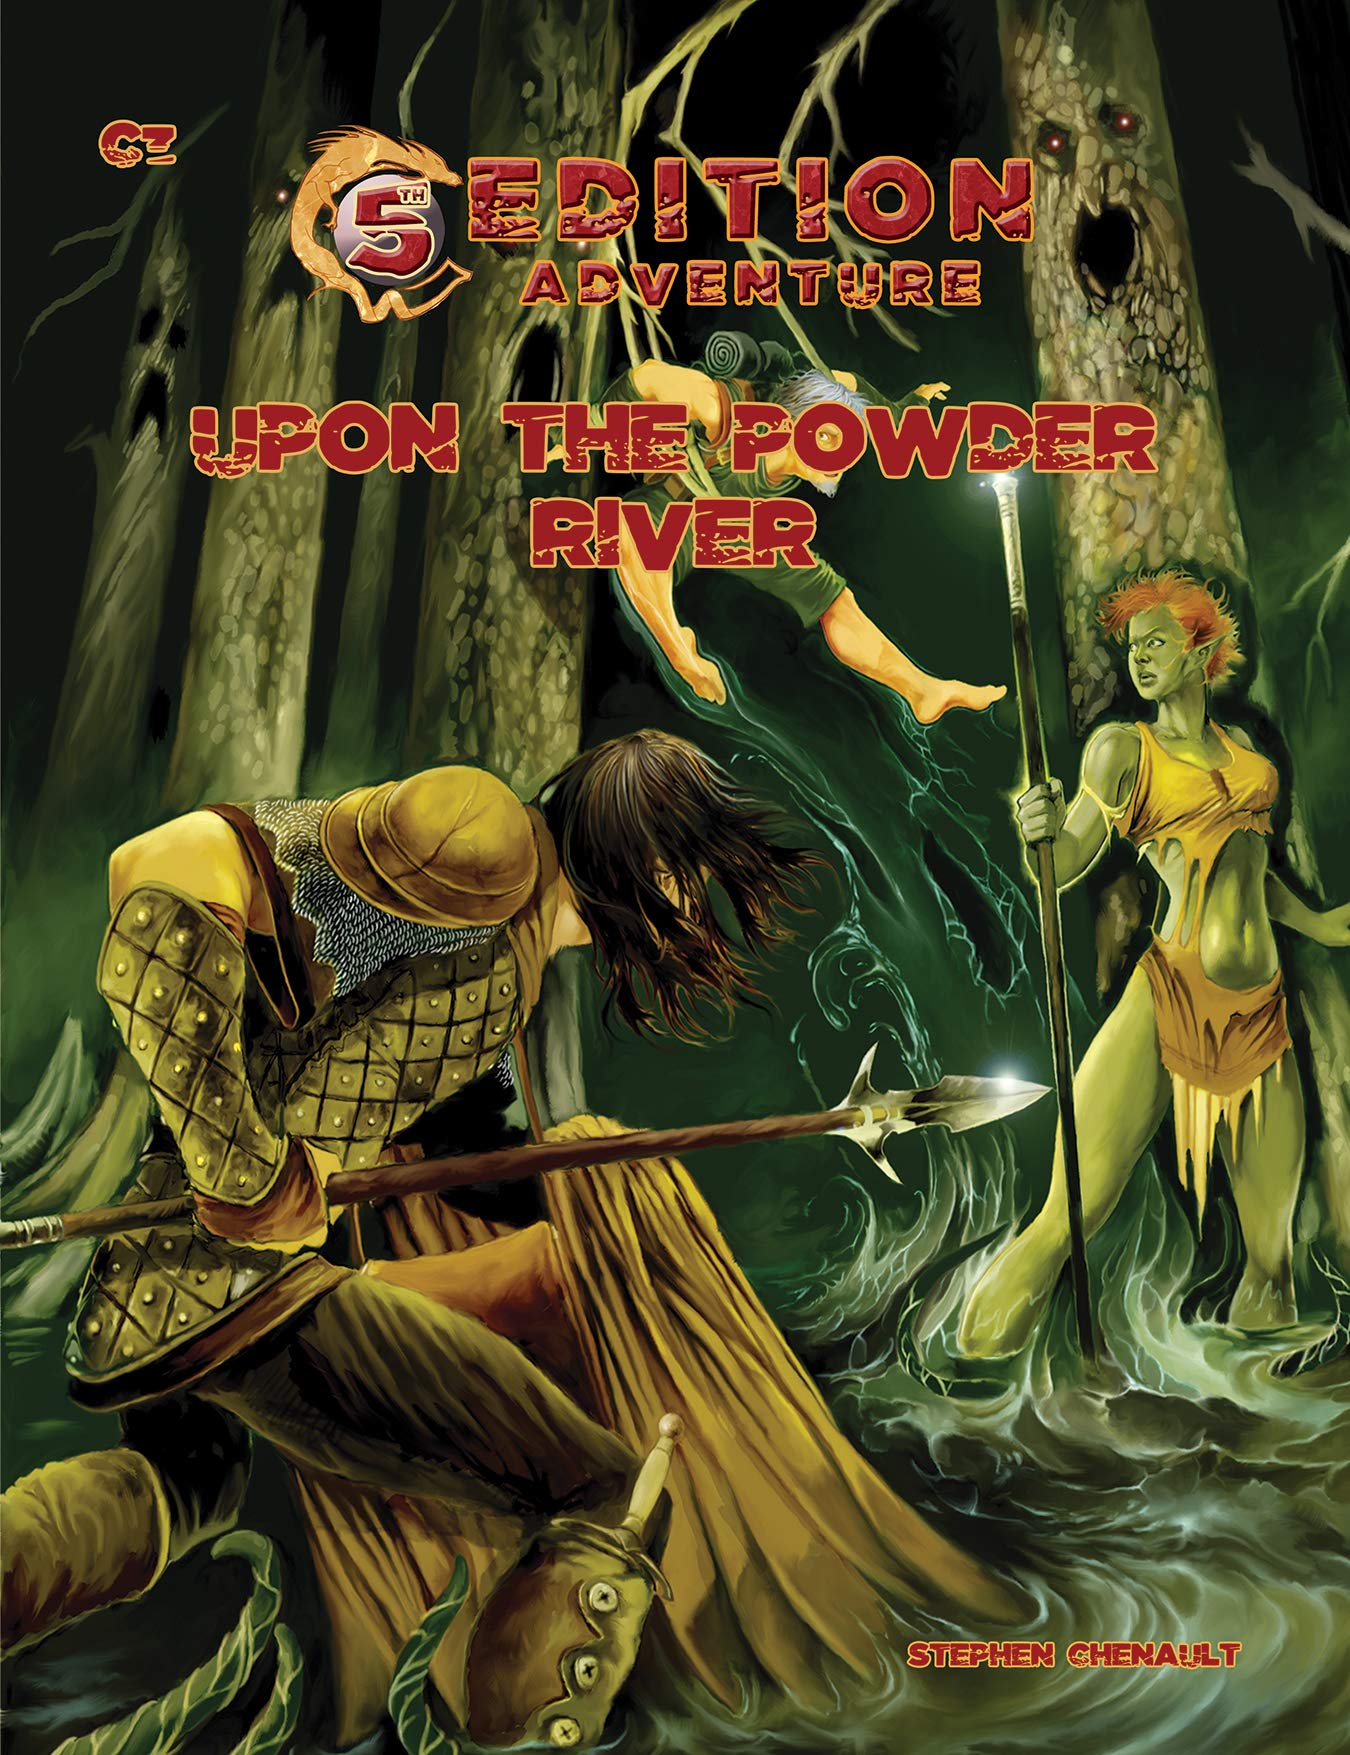 Troll Lord Games 5th Edition Adventures: C3 Upon The Powder River